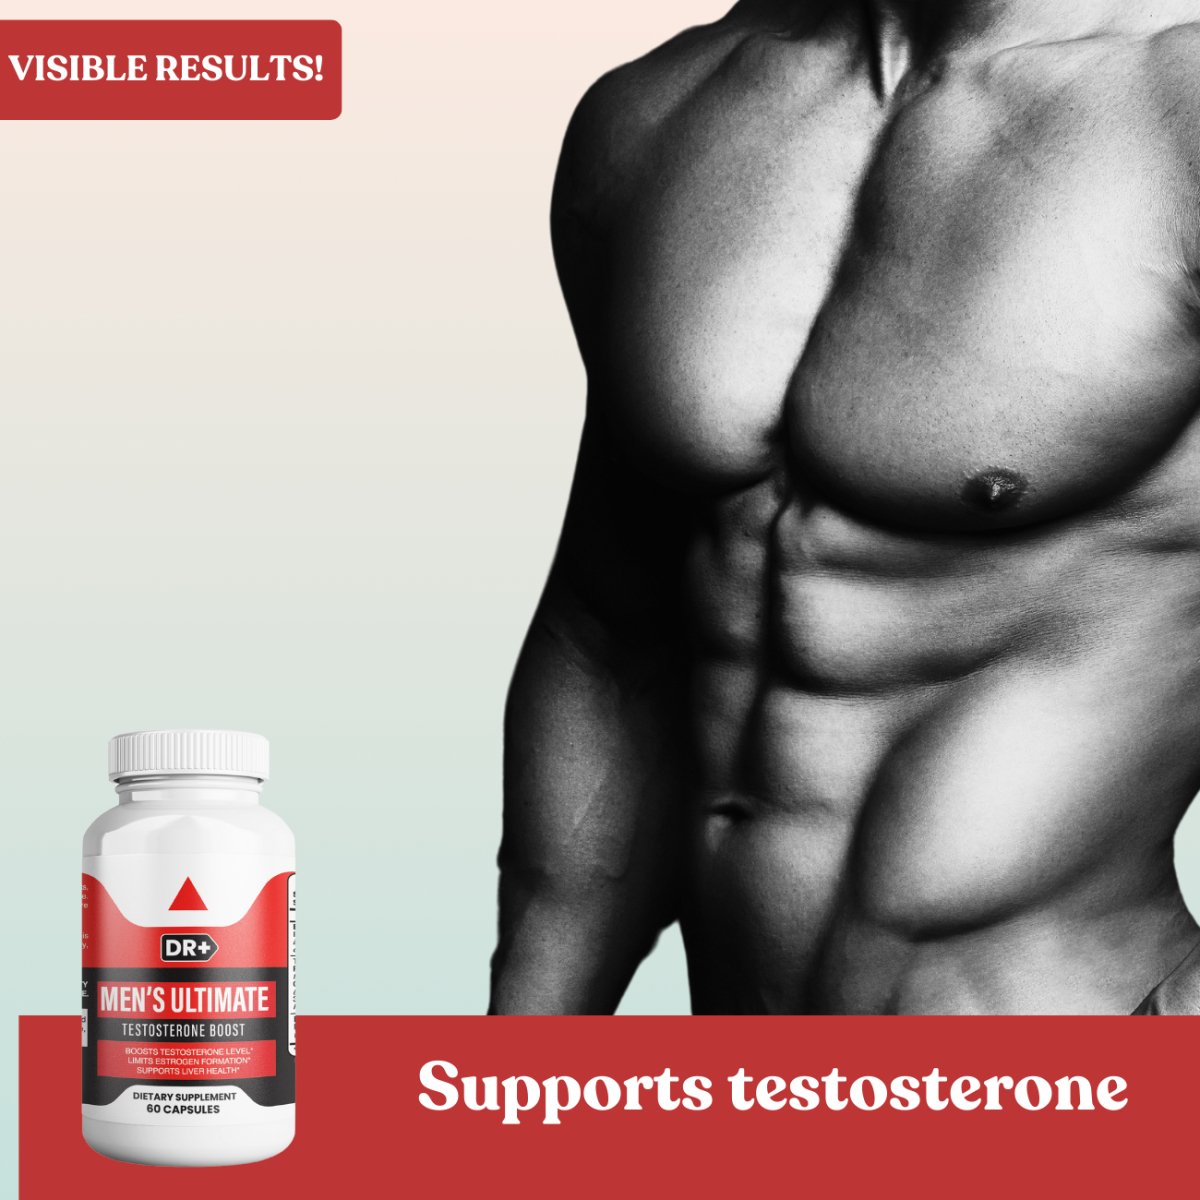 Natural PCT Testosterone Booster - Restores Hormone Levels, Control Estrogen, Support Muscle Mass | 6-Pack